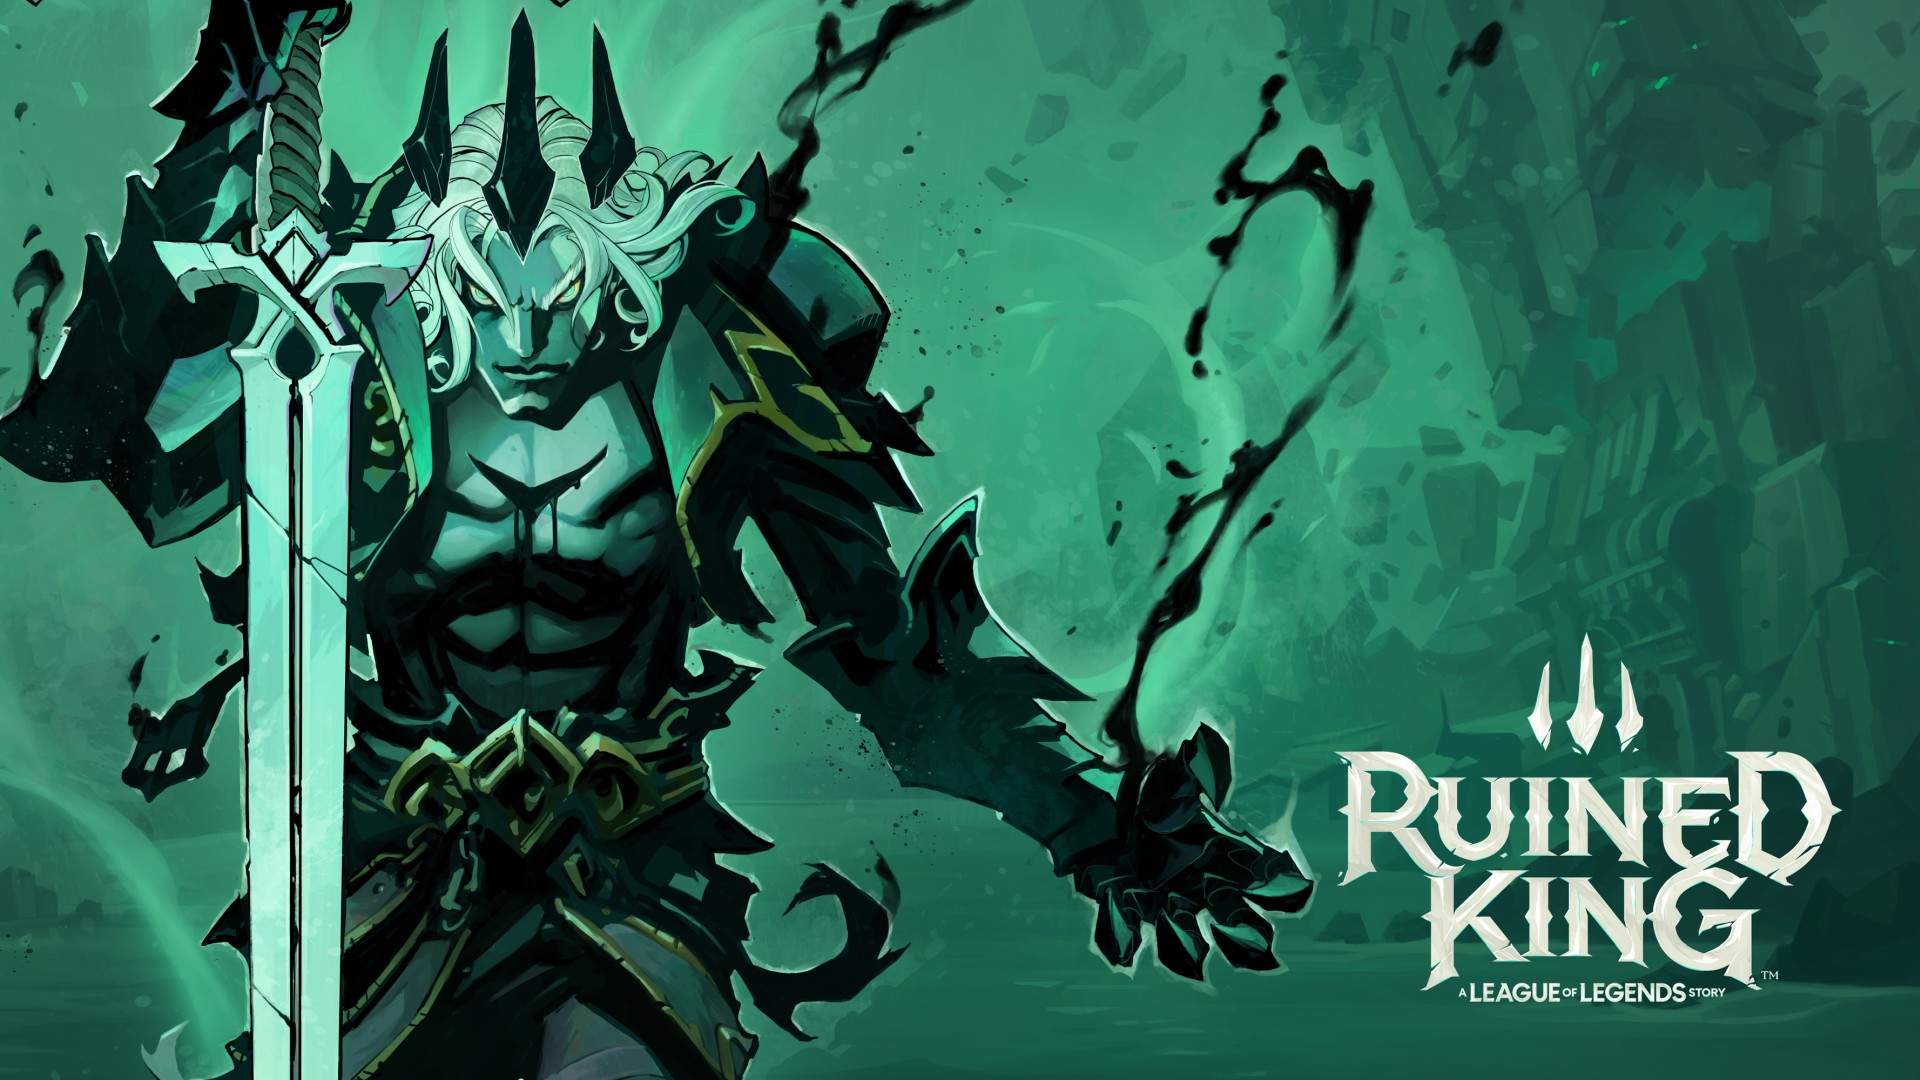 Video For Ruined King: A League of Legends Story is Available Now